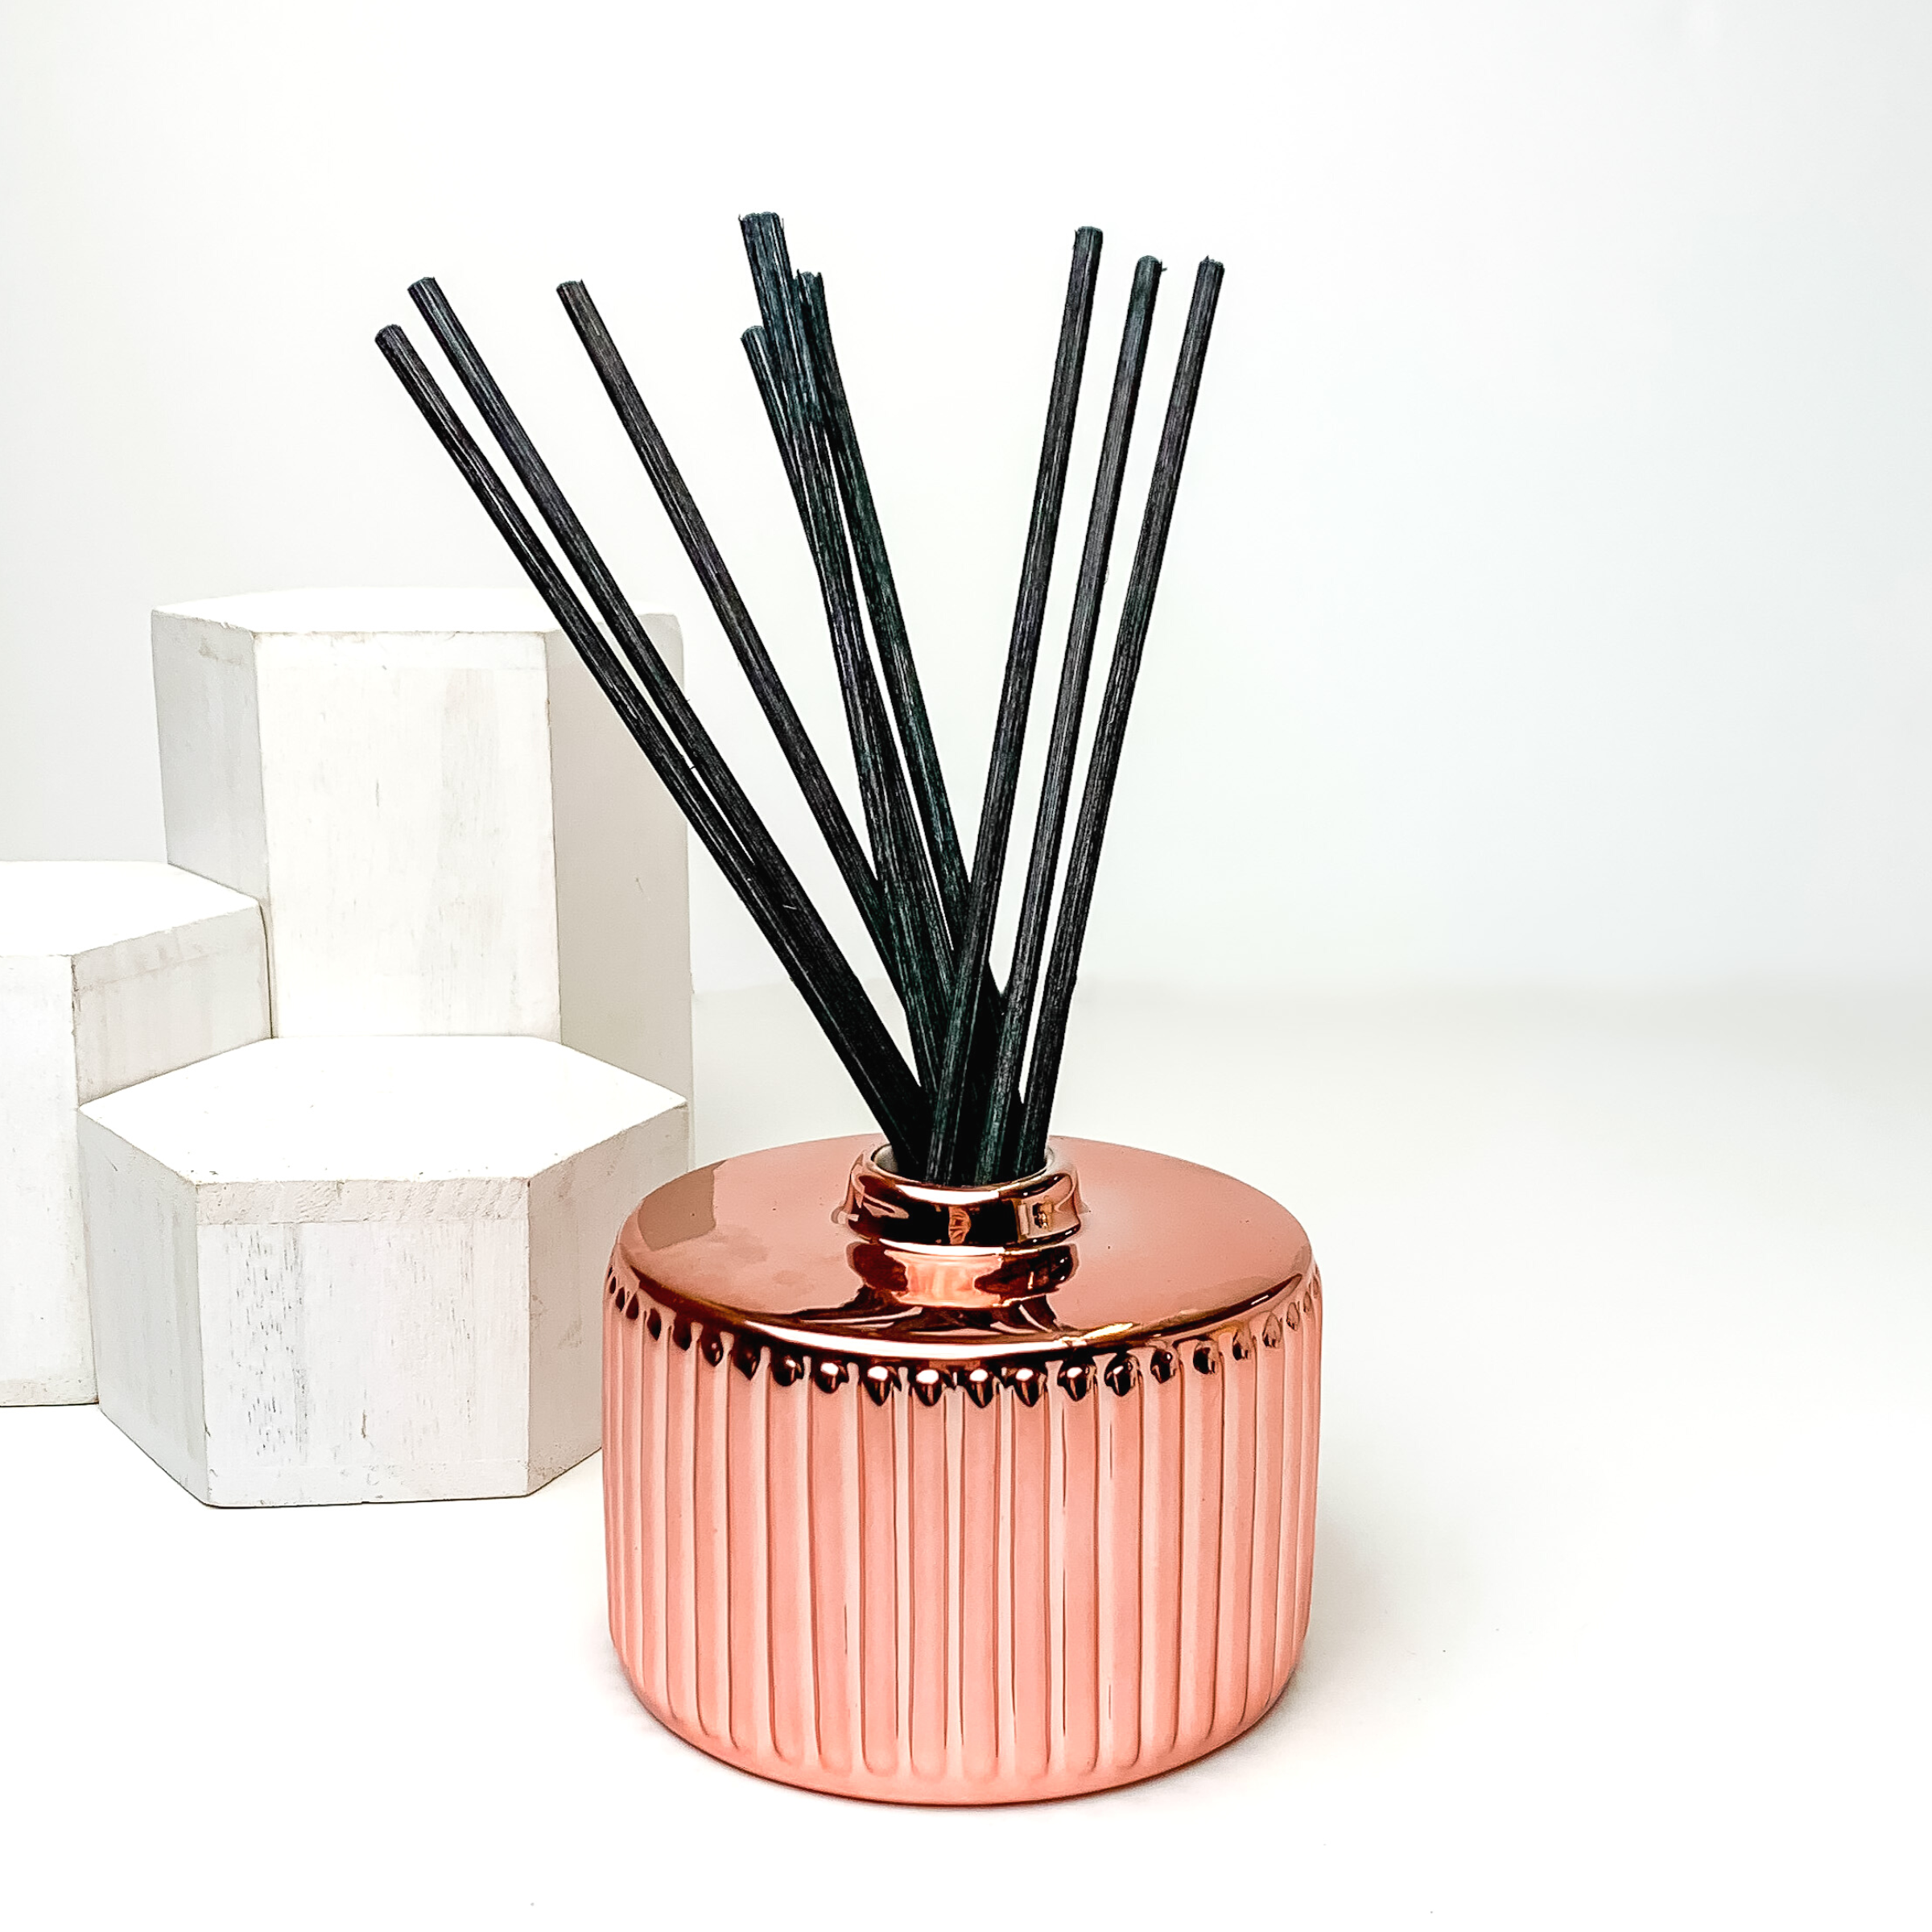 Rose gold diffuser holder with black reeds sticking out of the top. This diffuser is pictured on a white background with white blocks on the left side of the candle. 